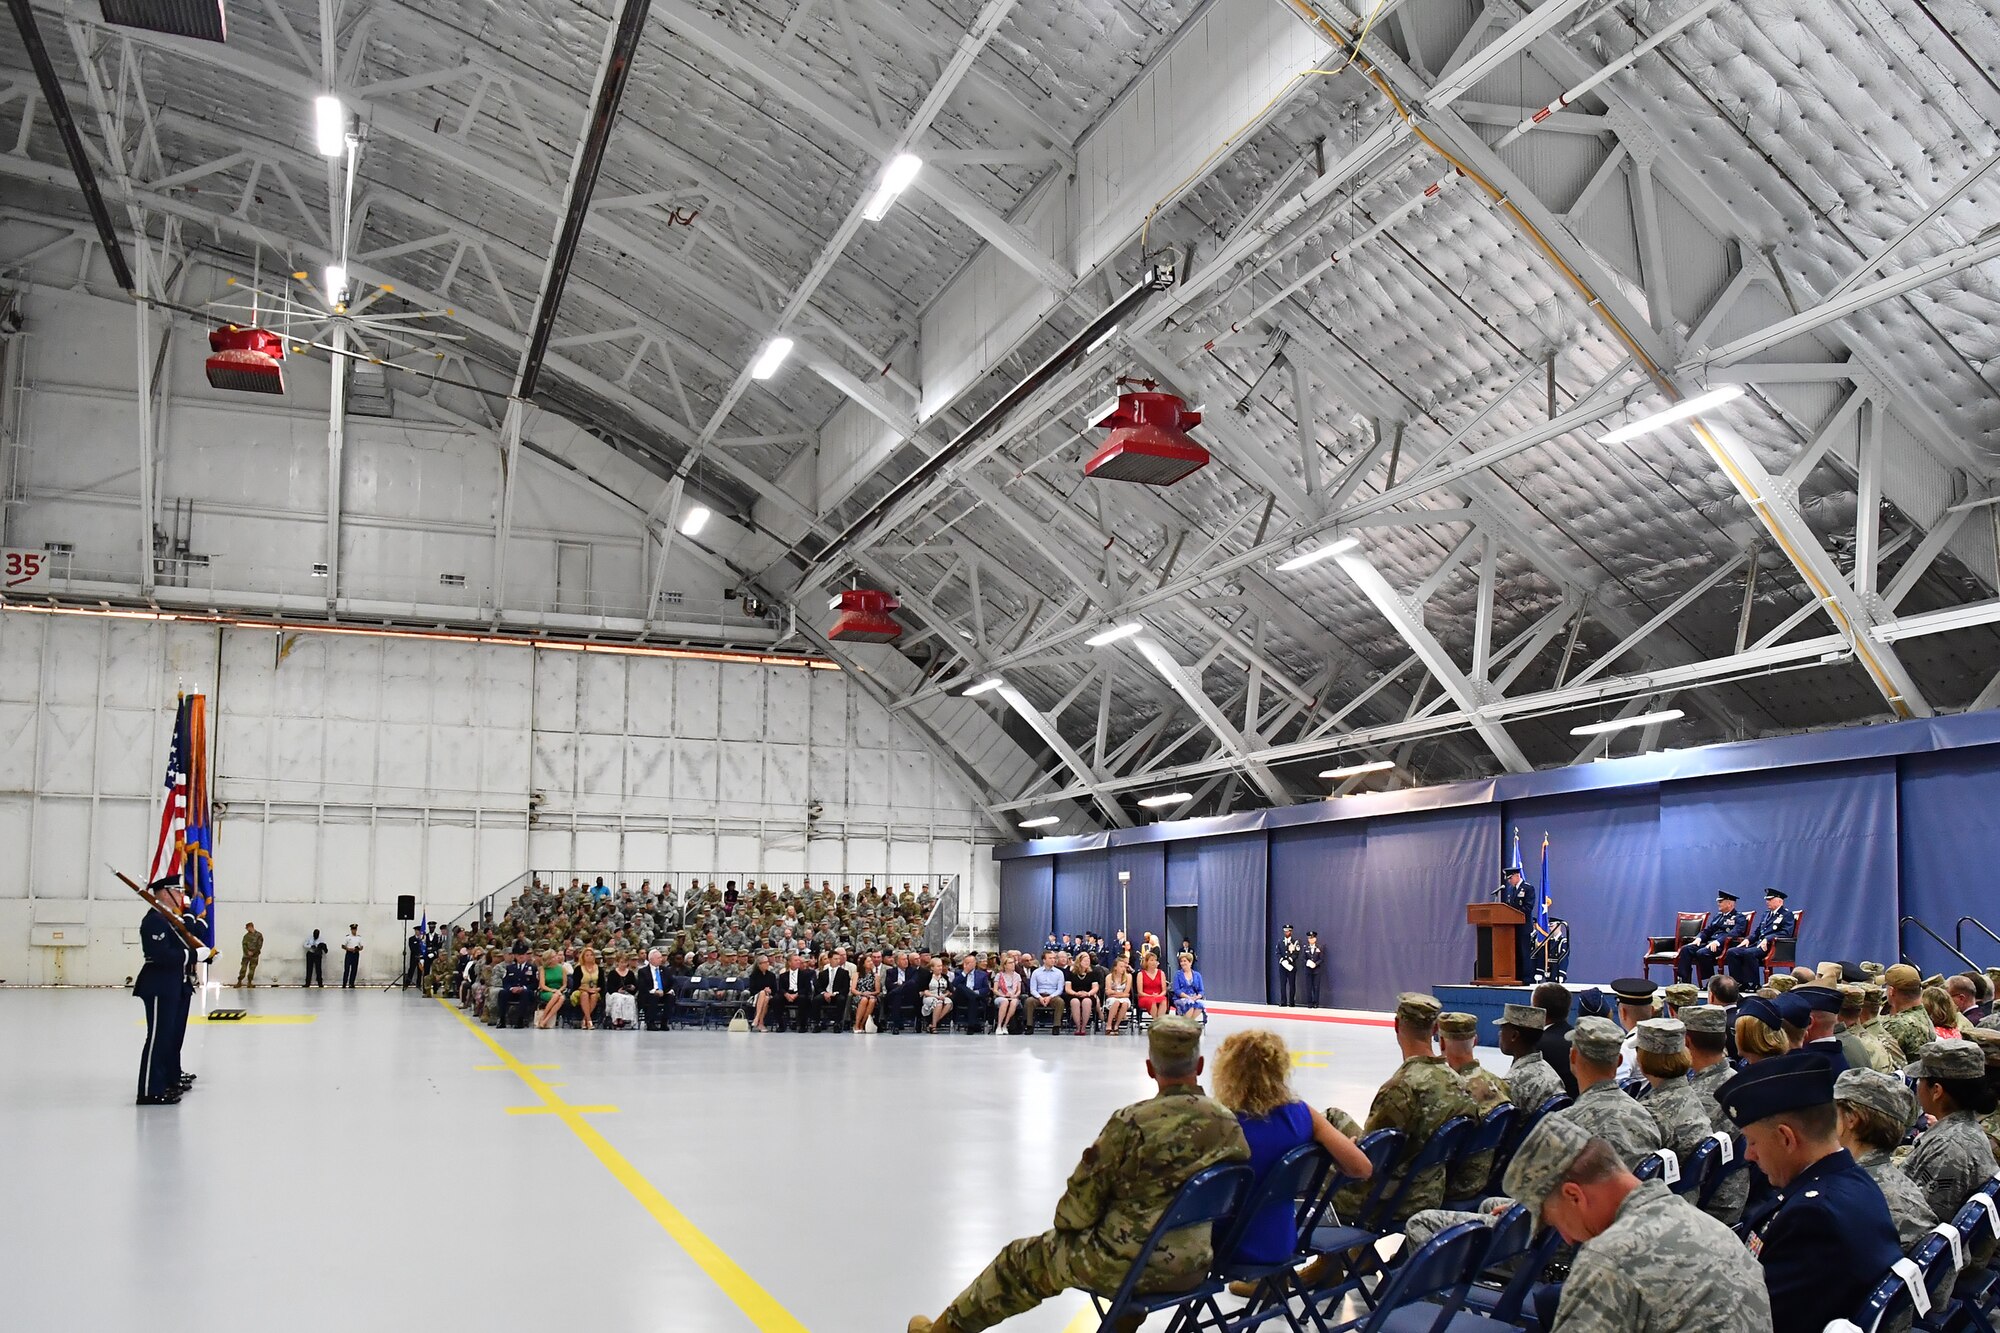 Air Force Vice Chief of Staff Gen. Stephen W. Wilson delivers remarks as he presides over the Air Force District of Washington Change of Command Ceremony at Joint Base Andrews, Md., July 9, 2019. (Air Force photo by Adrian Cadiz)